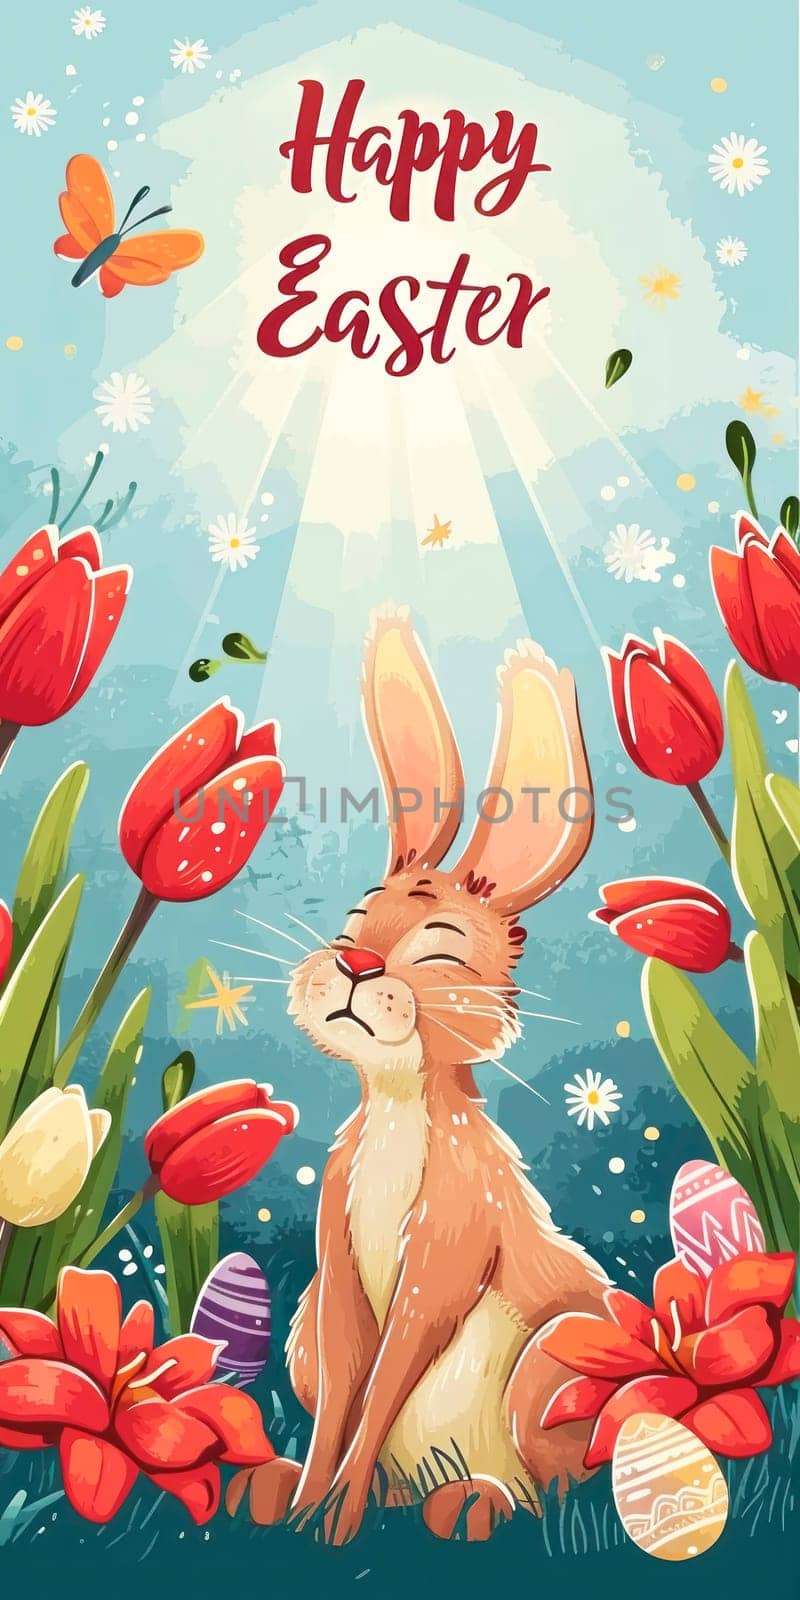 A joyous Easter greeting featuring an illustrated bunny basking in the sun among blooming tulips and fluttering butterflies, with a Happy Easter message.